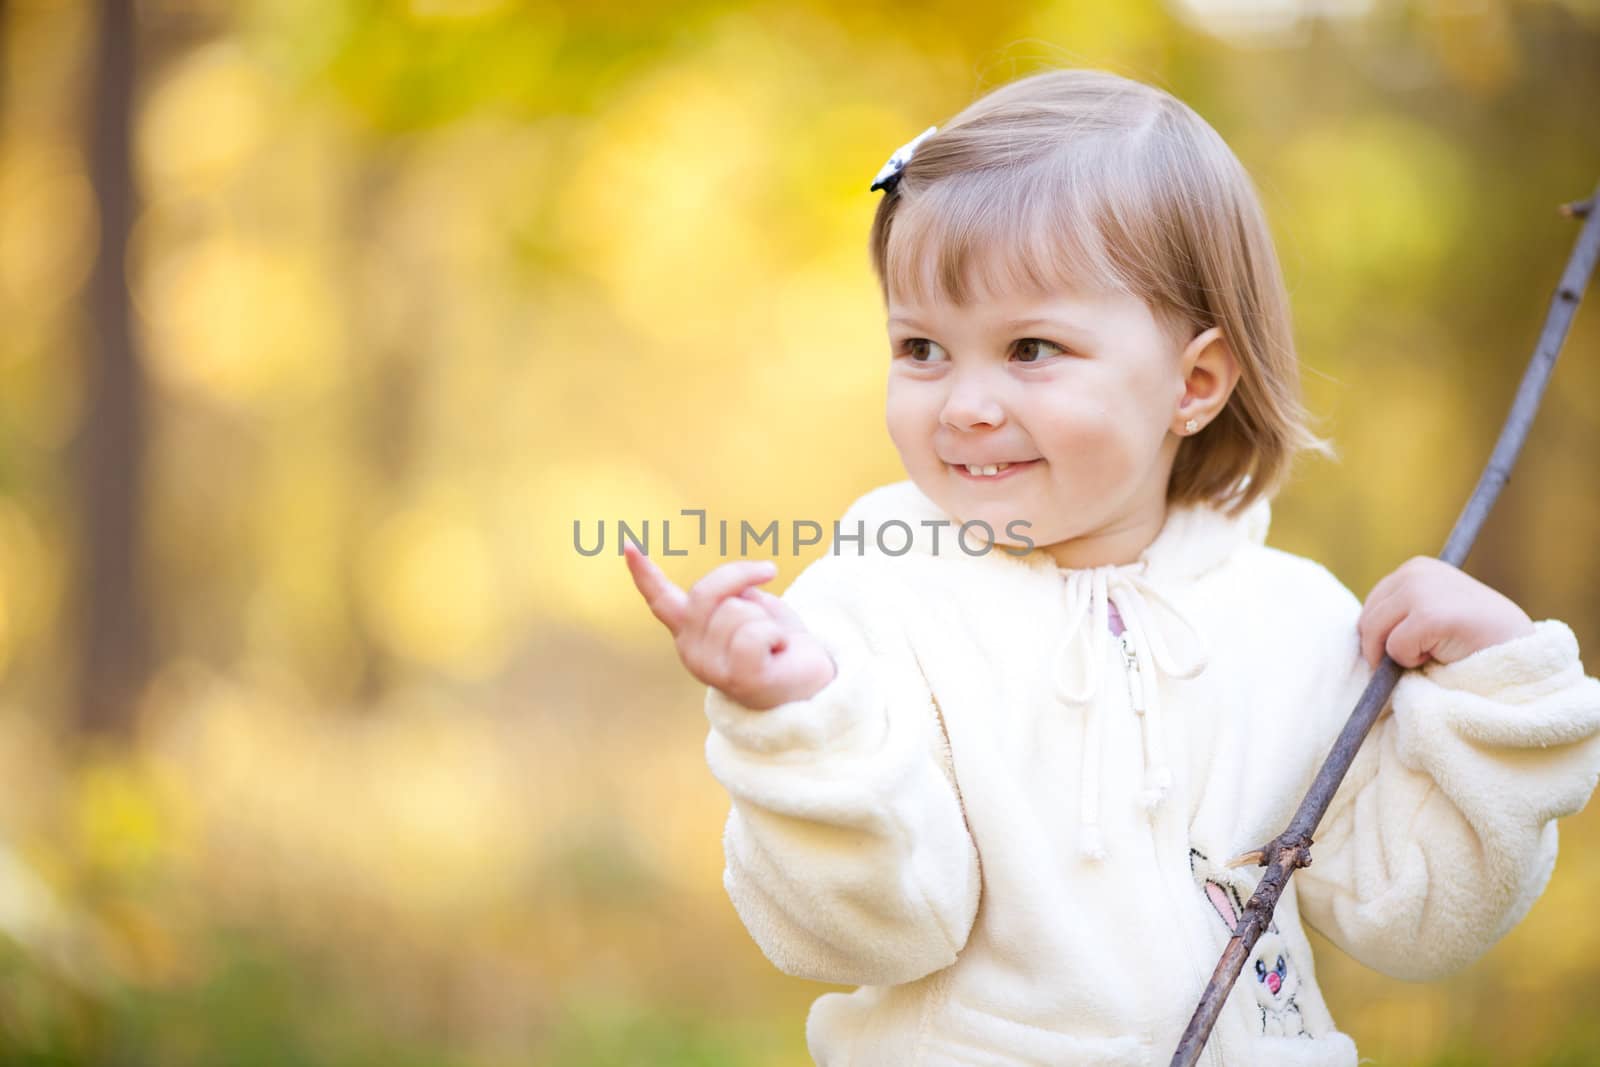 beautiful little girl with a stick on the autumn forest by jannyjus